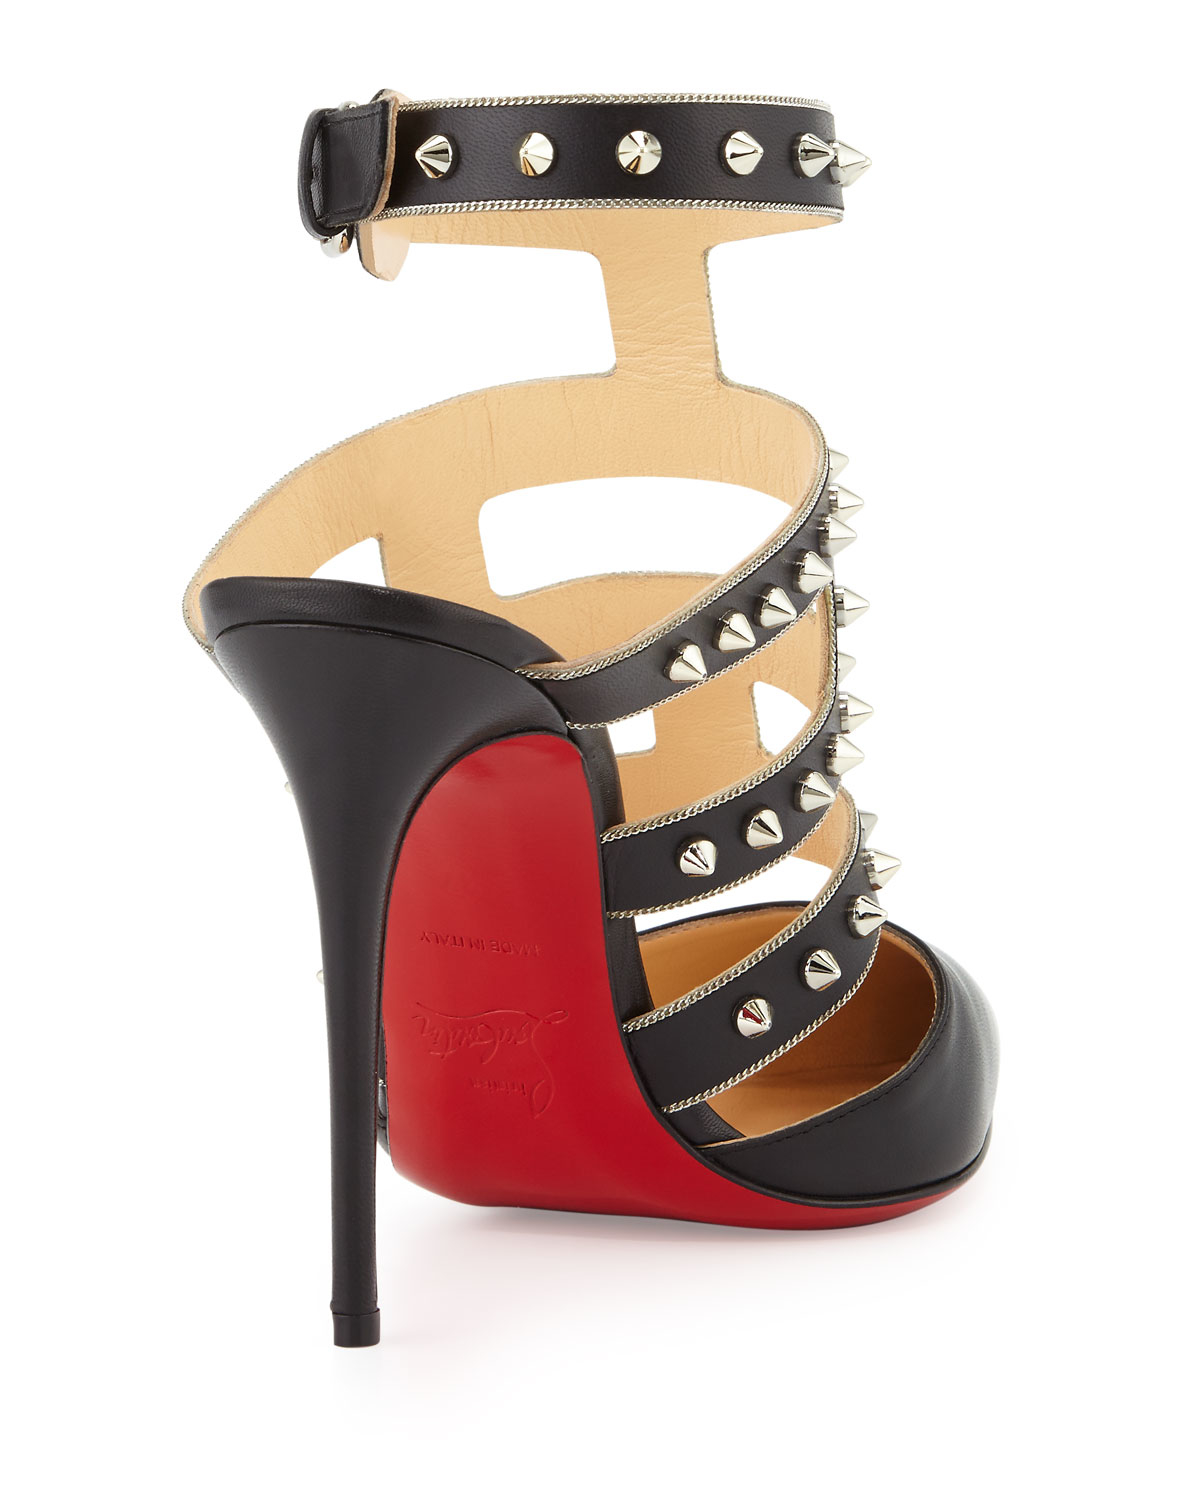 black christian louboutins - Christian louboutin Tchikaboum Studded Red Sole Pump in Silver ...